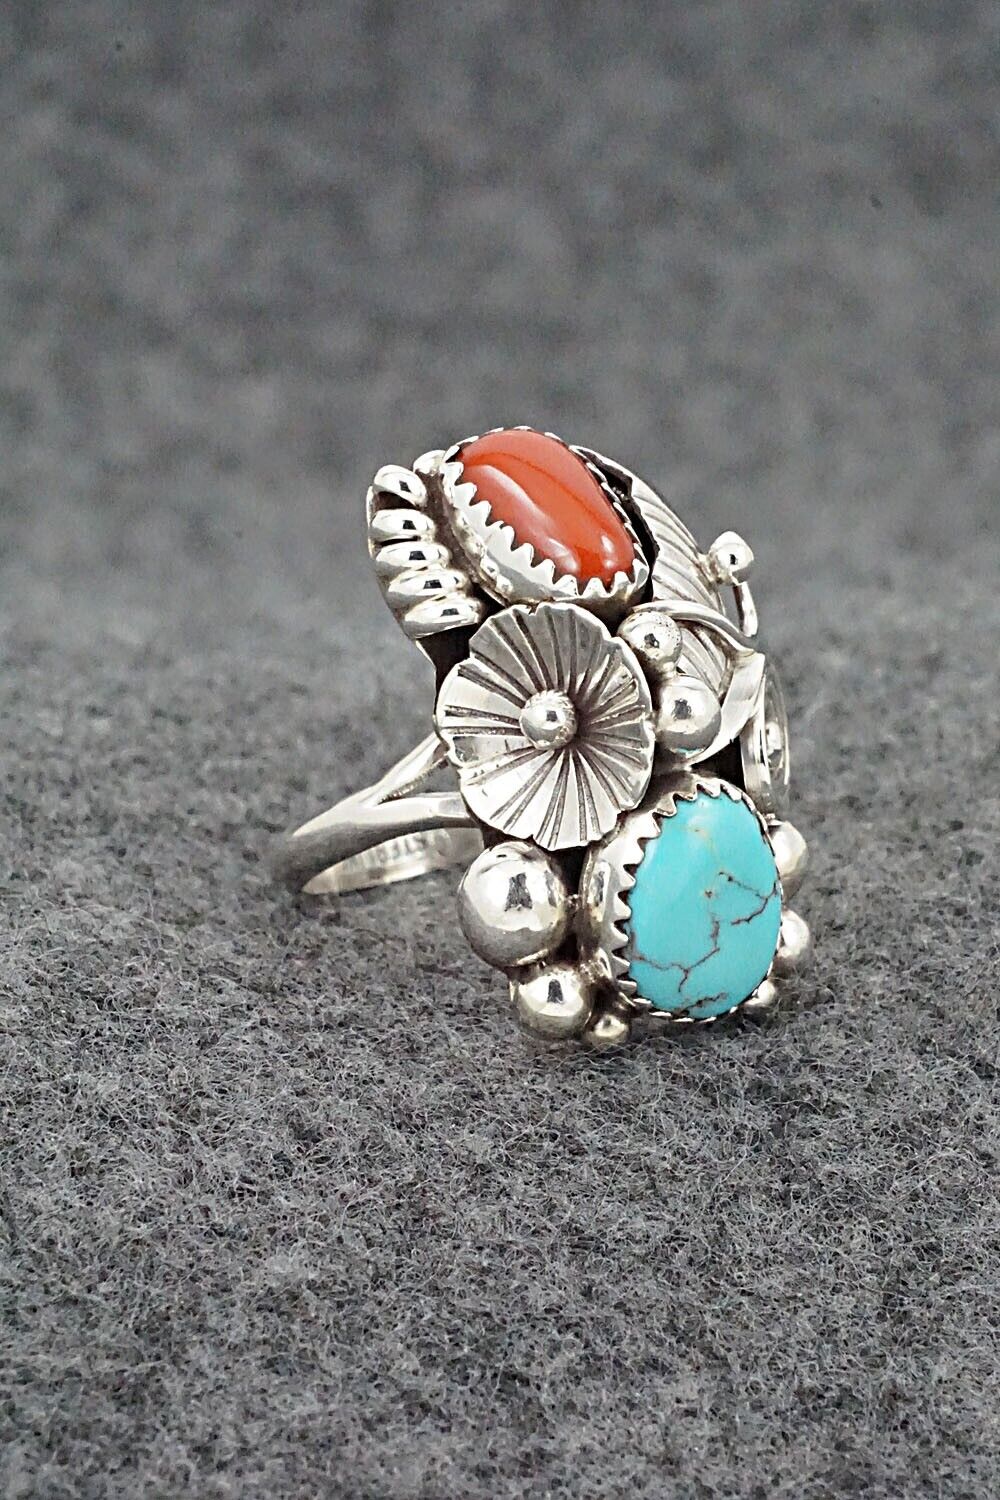 Turquoise, Coral & Sterling Silver Ring - Max Calladitto - Size 7.25